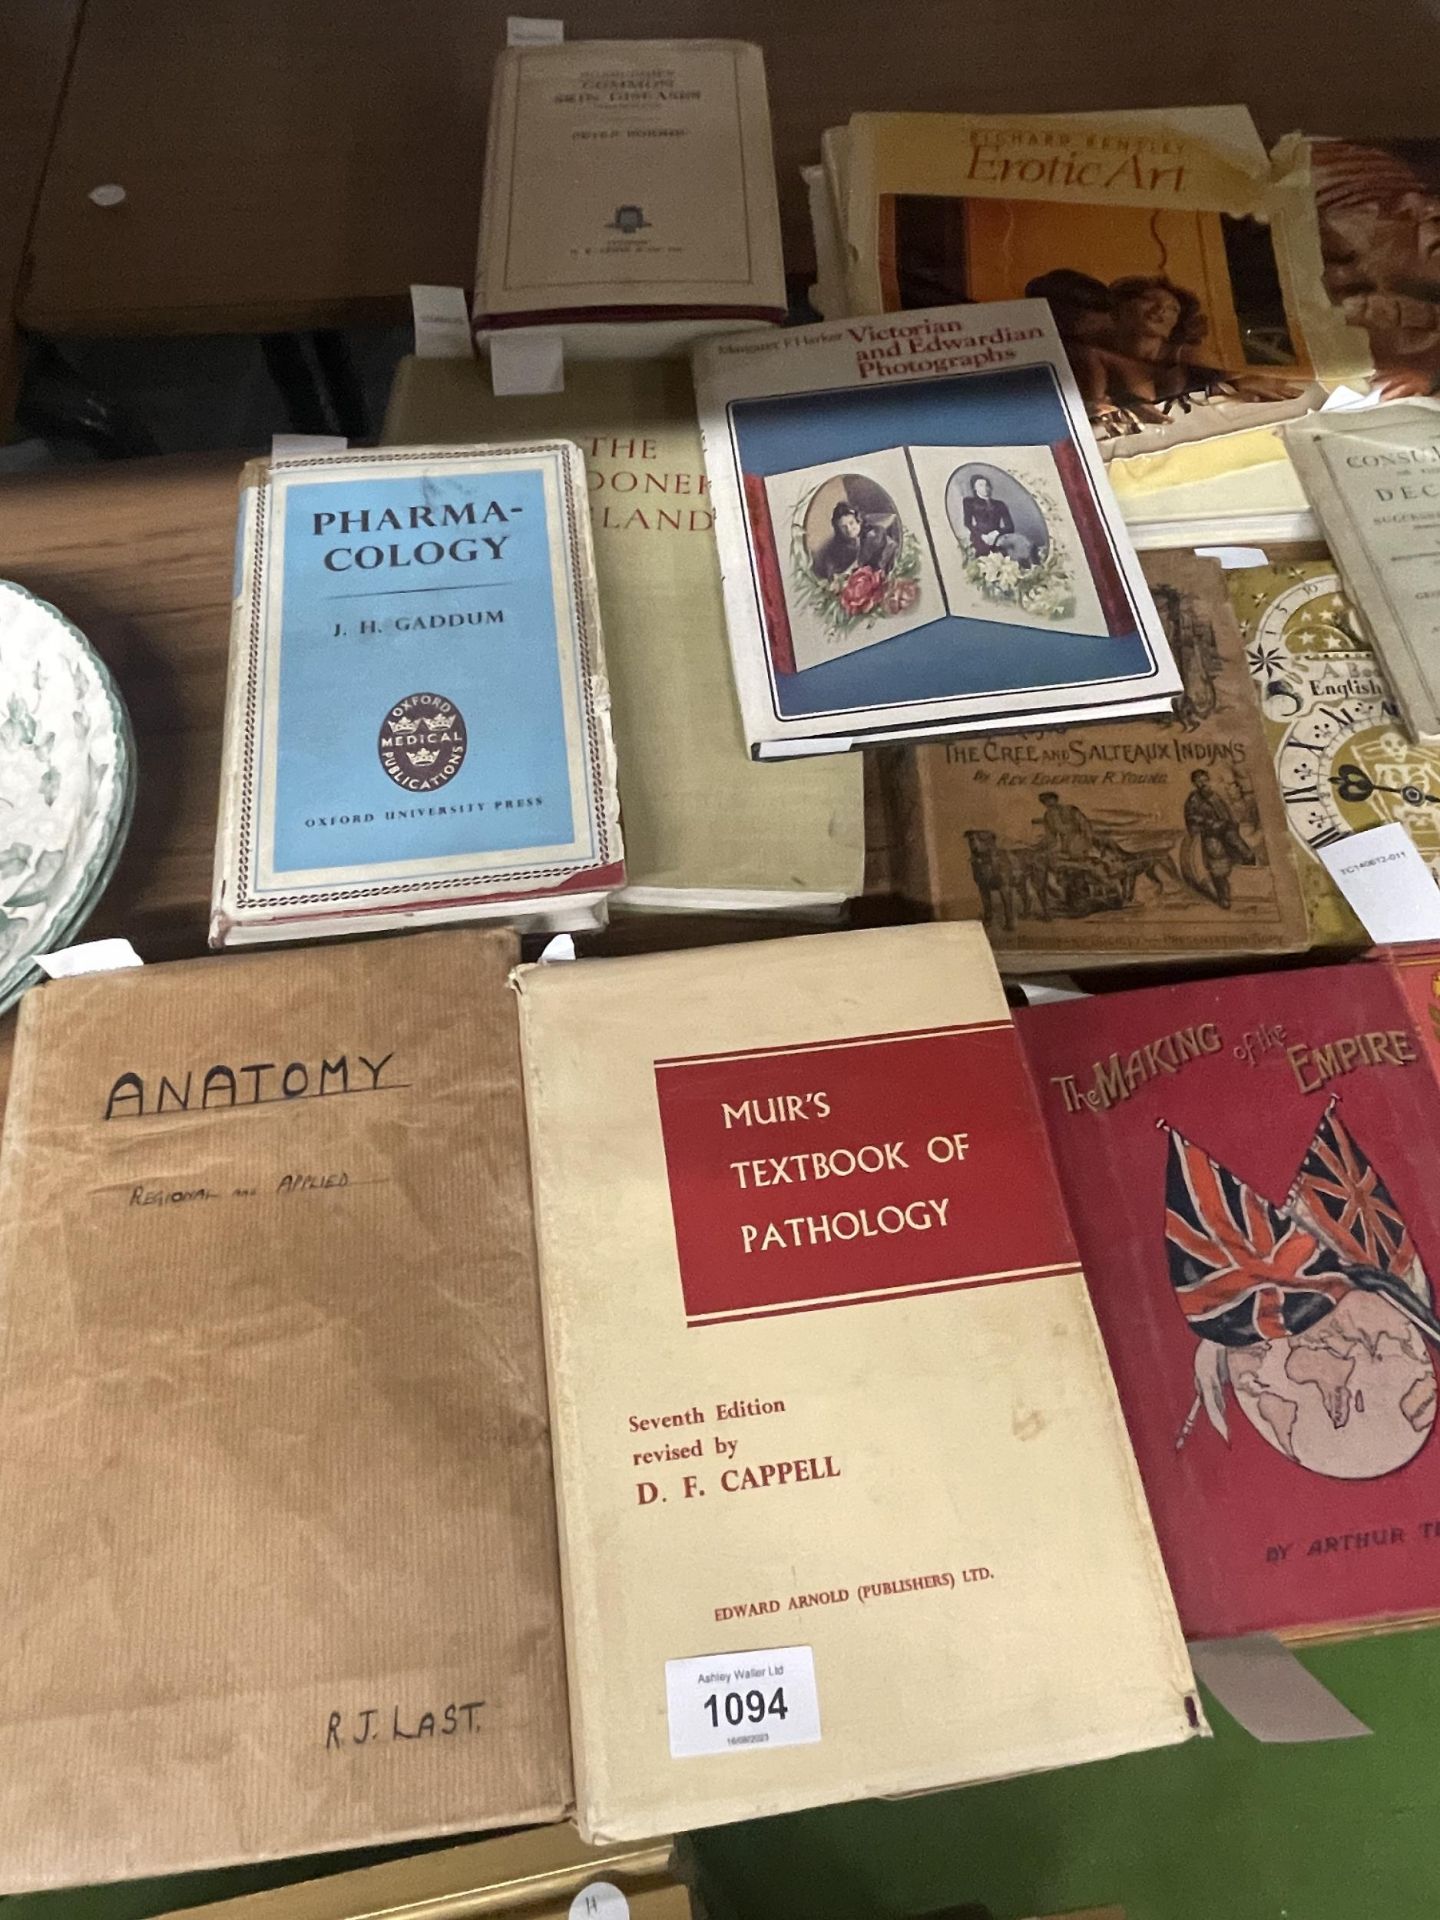 A COLLECTION OF VINTAGE BOOKS, RELATING TO MEDICINE AND HEALTH - Image 4 of 4